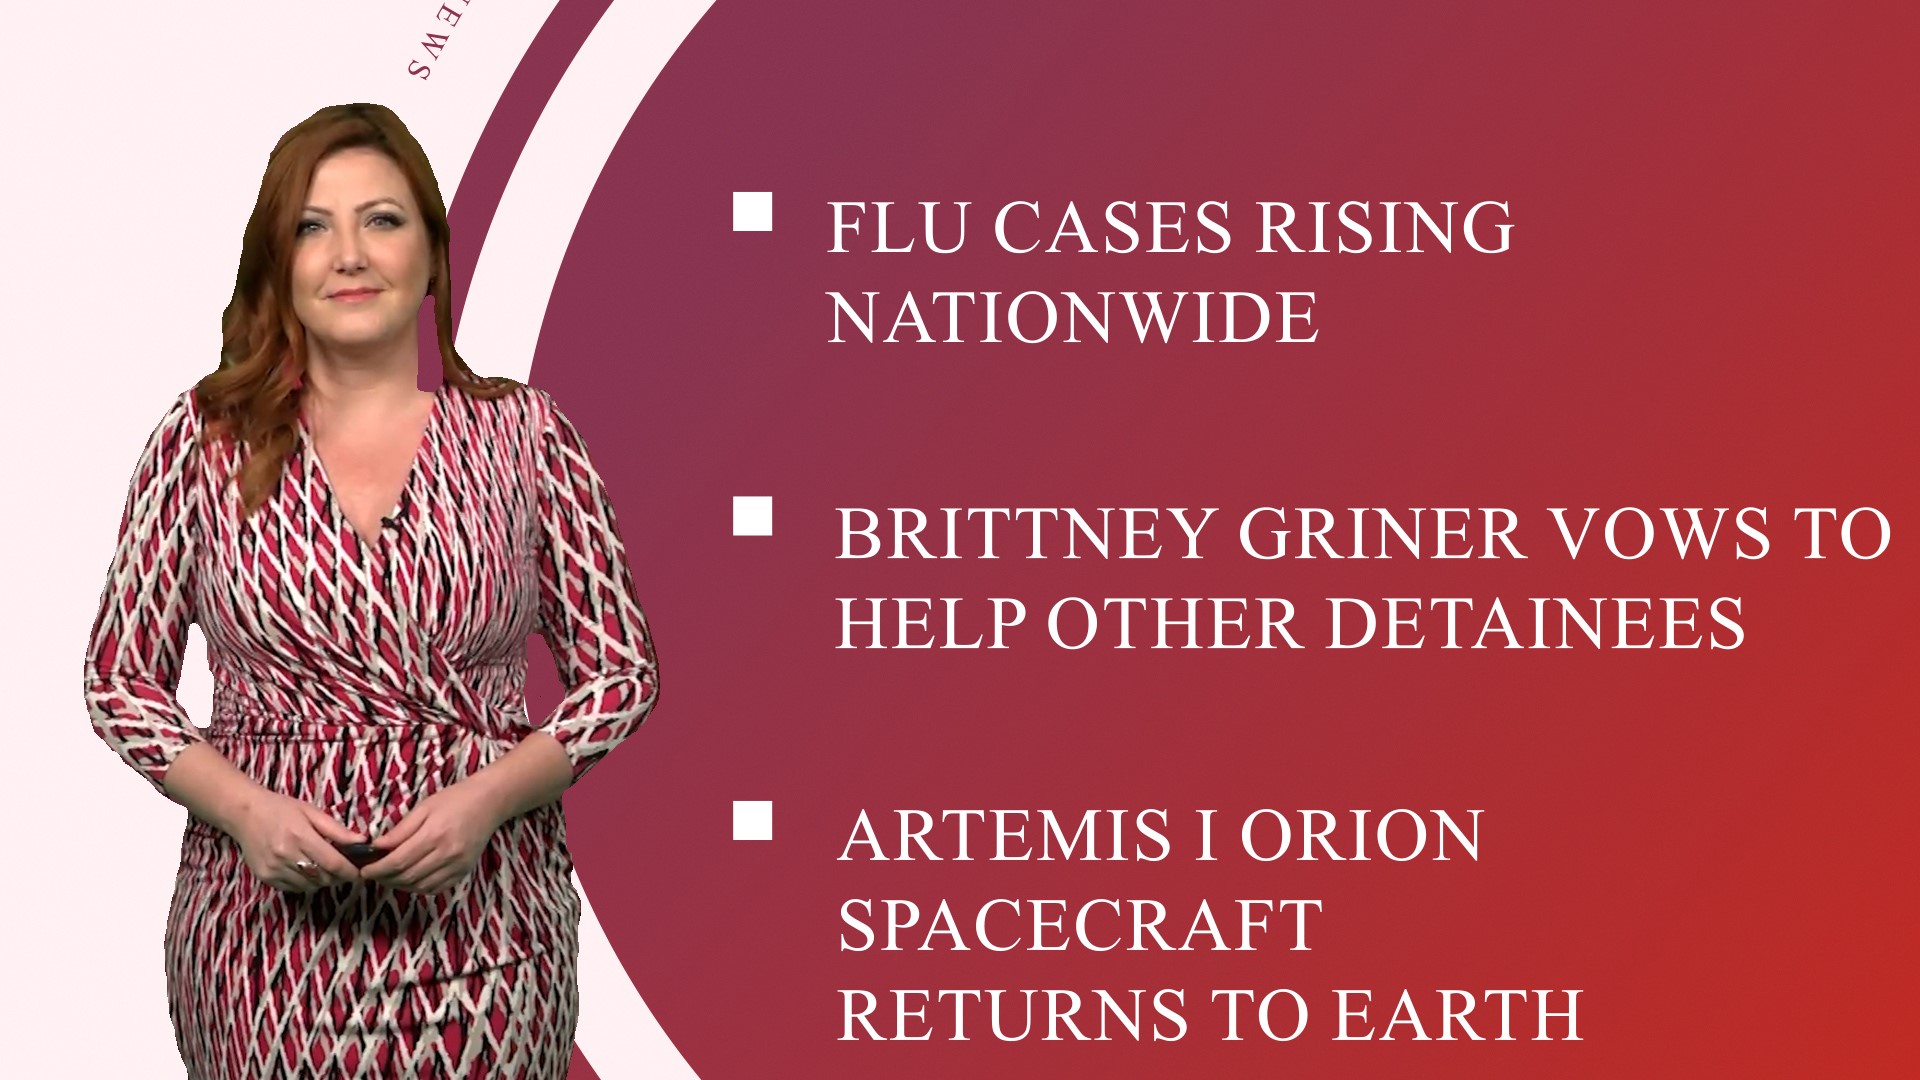 A look at what is happening in the news from rising flu cases to Griner's vow to help other detainees and a bombing suspect now in U.S. custody.